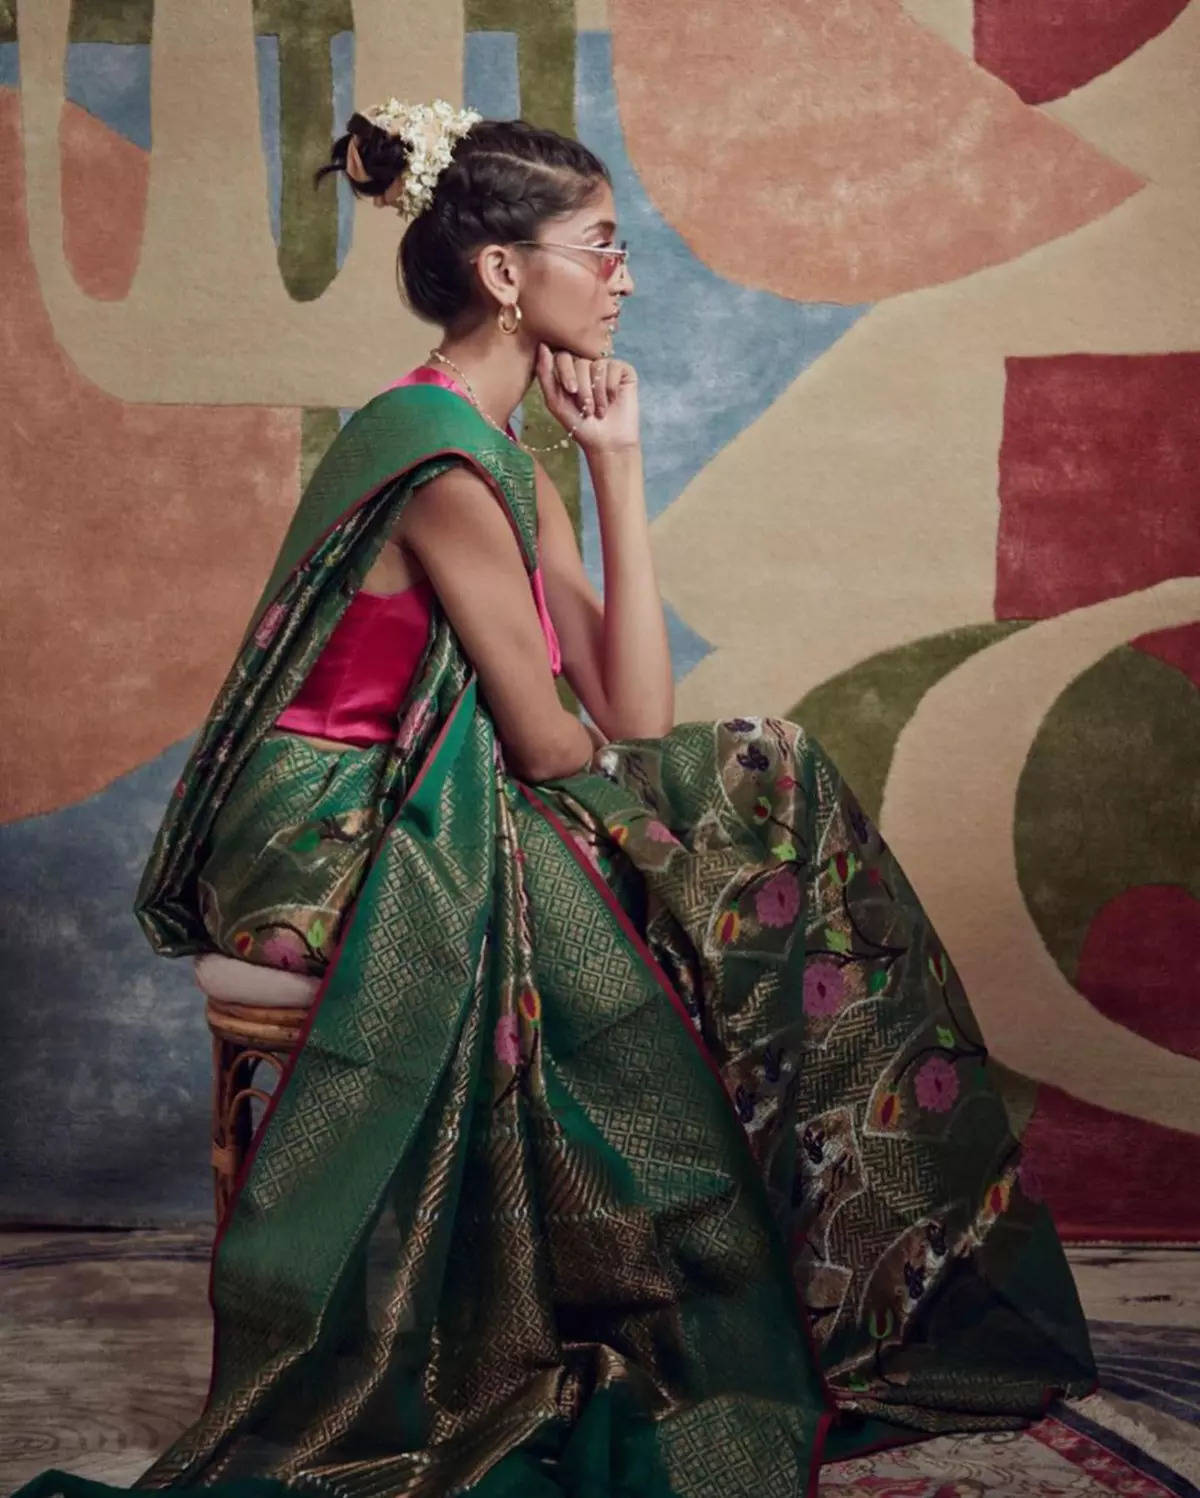 ​Indian model Priyal Shah conquers international fashion with stunning allure​